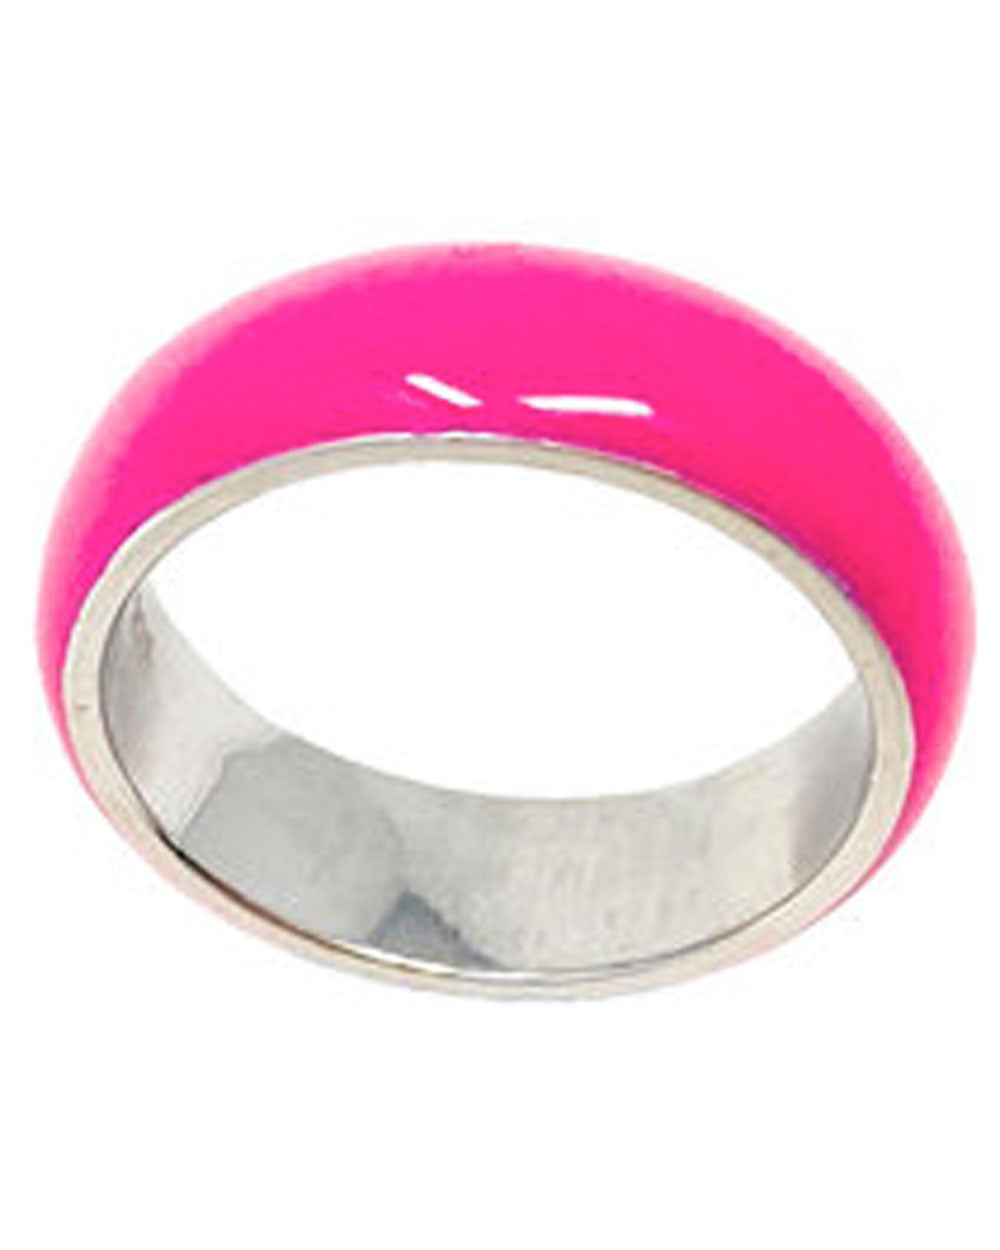 Neon Enamel and Silver Ring in Electric Pink